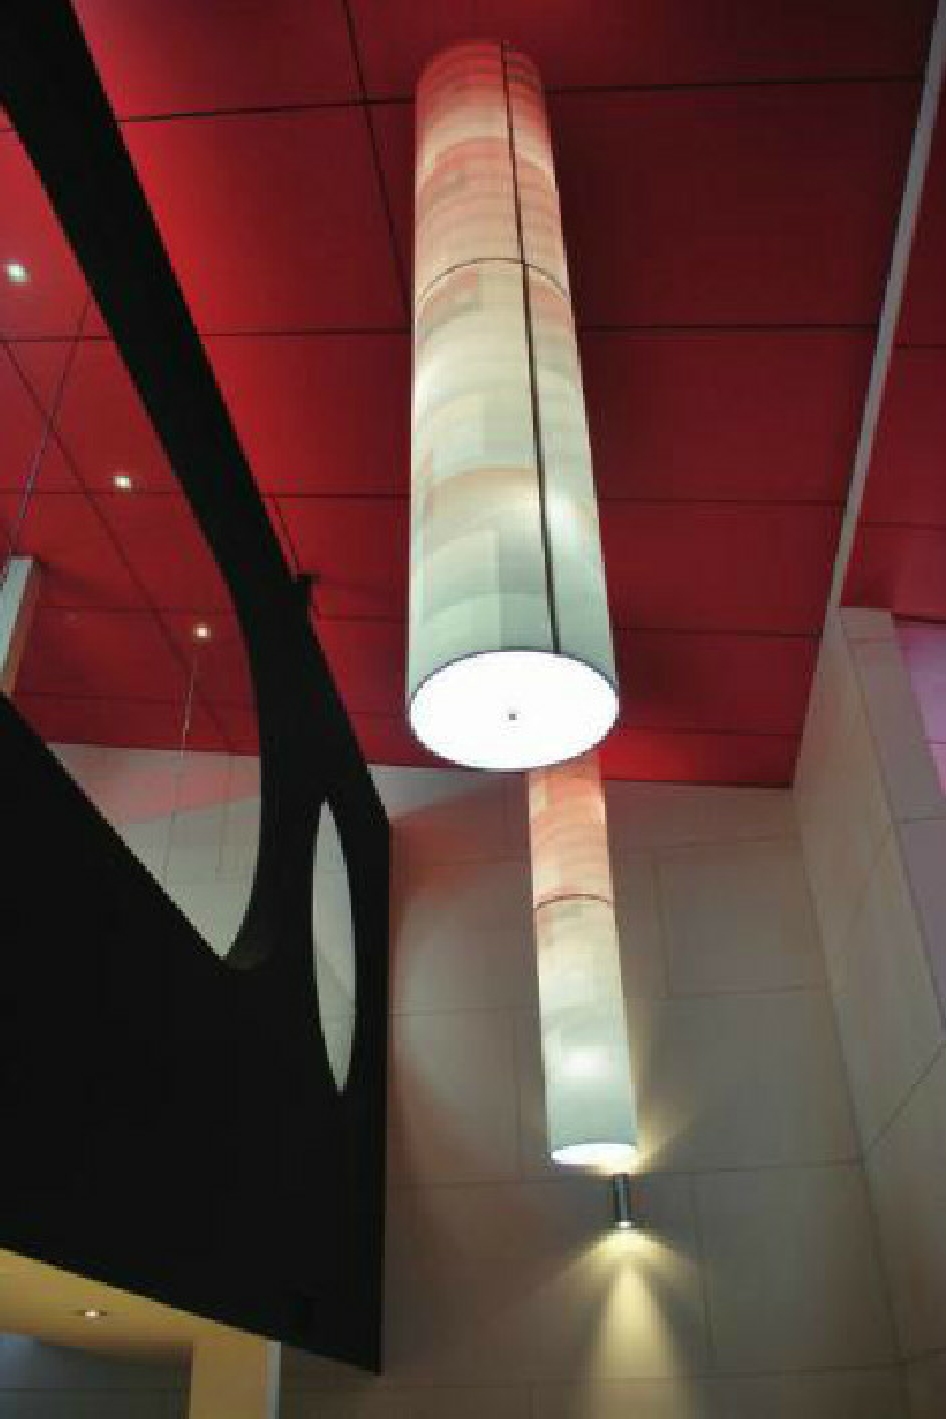 Bespoke Drum Light Cylinder Pendant suspended in a building void